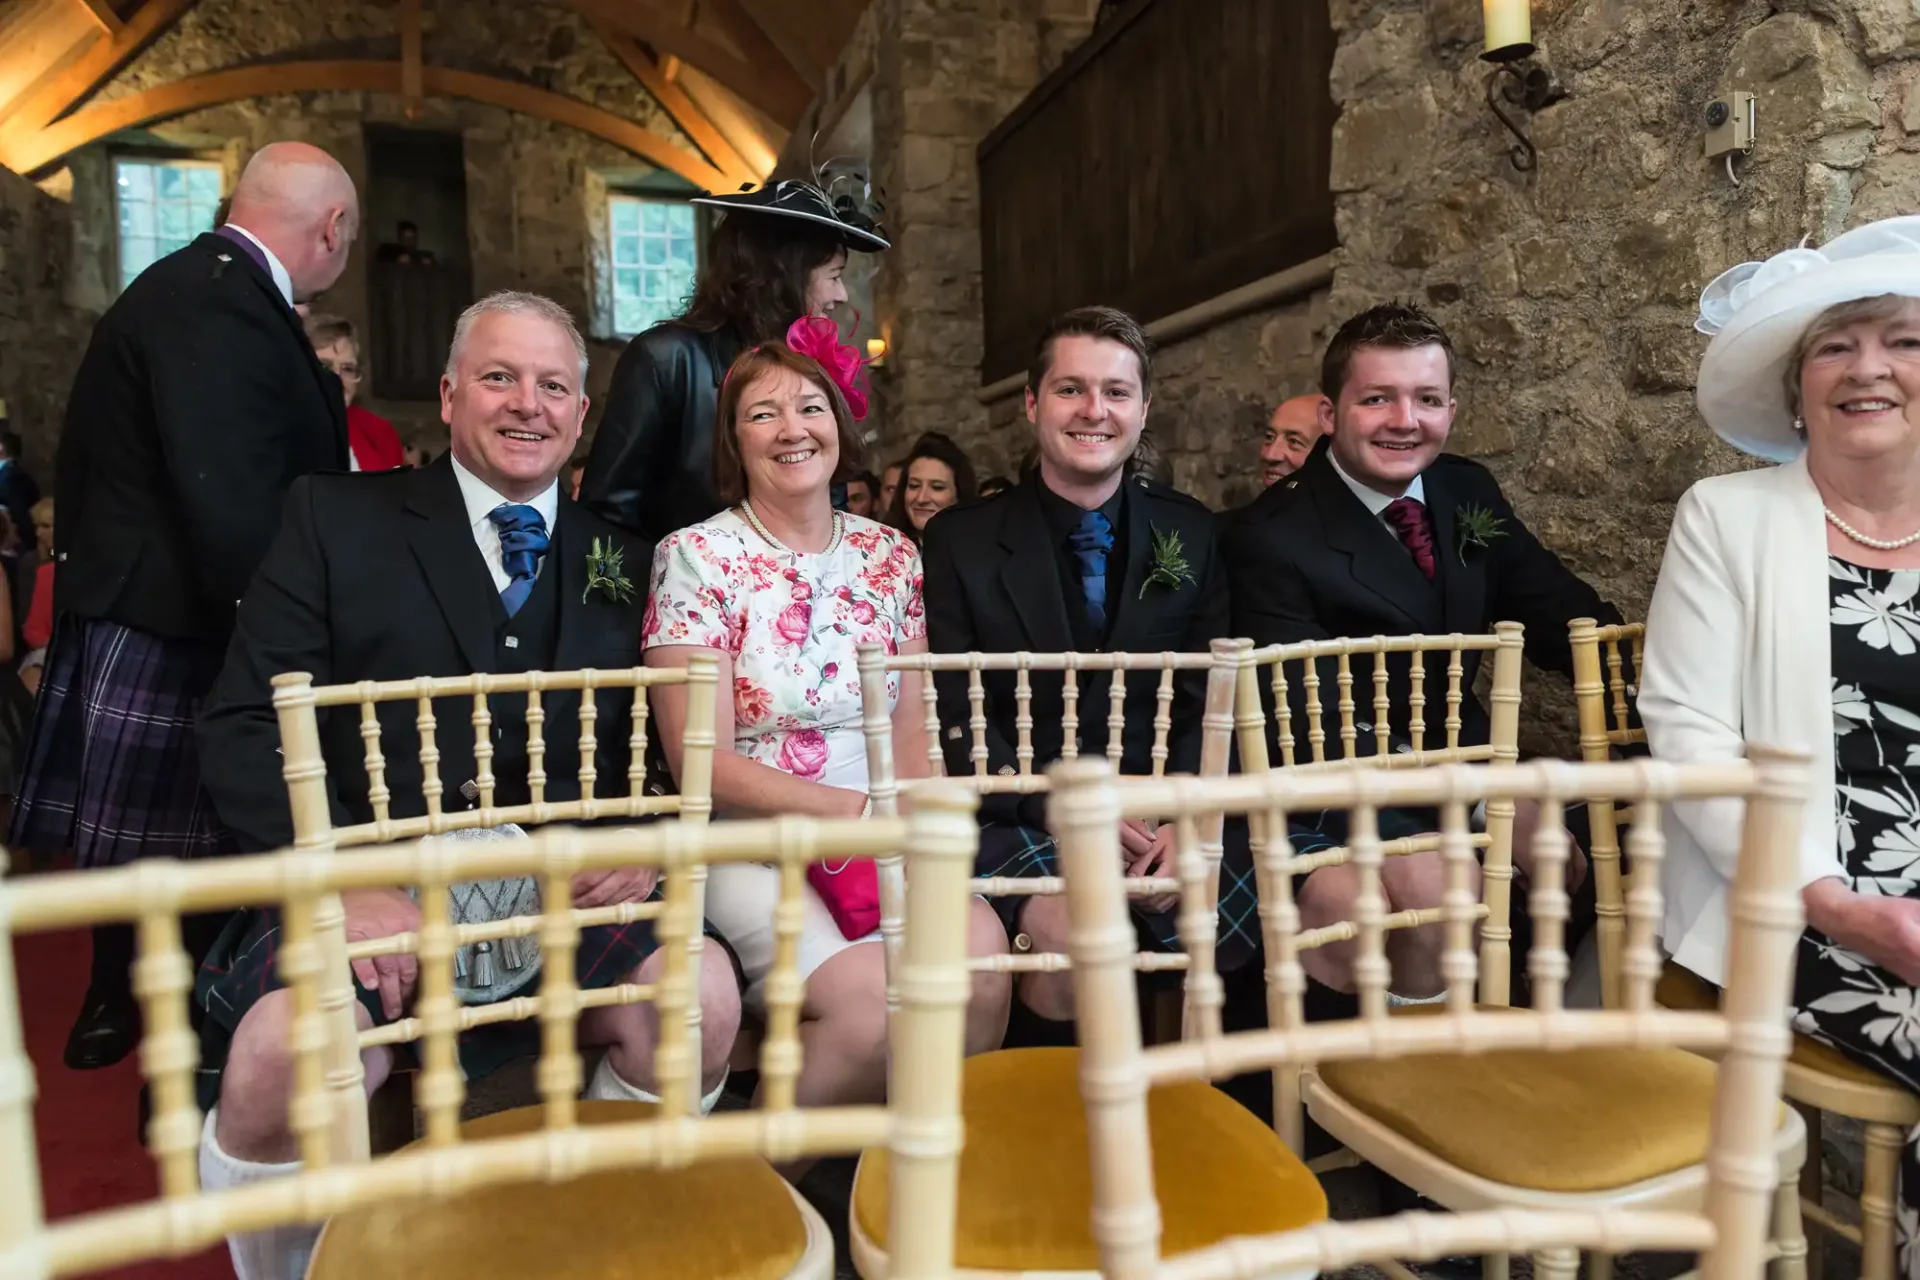 Five guests smiling and seated in a row at a wedding, with other attendees in the background, in a historic venue with stone walls.